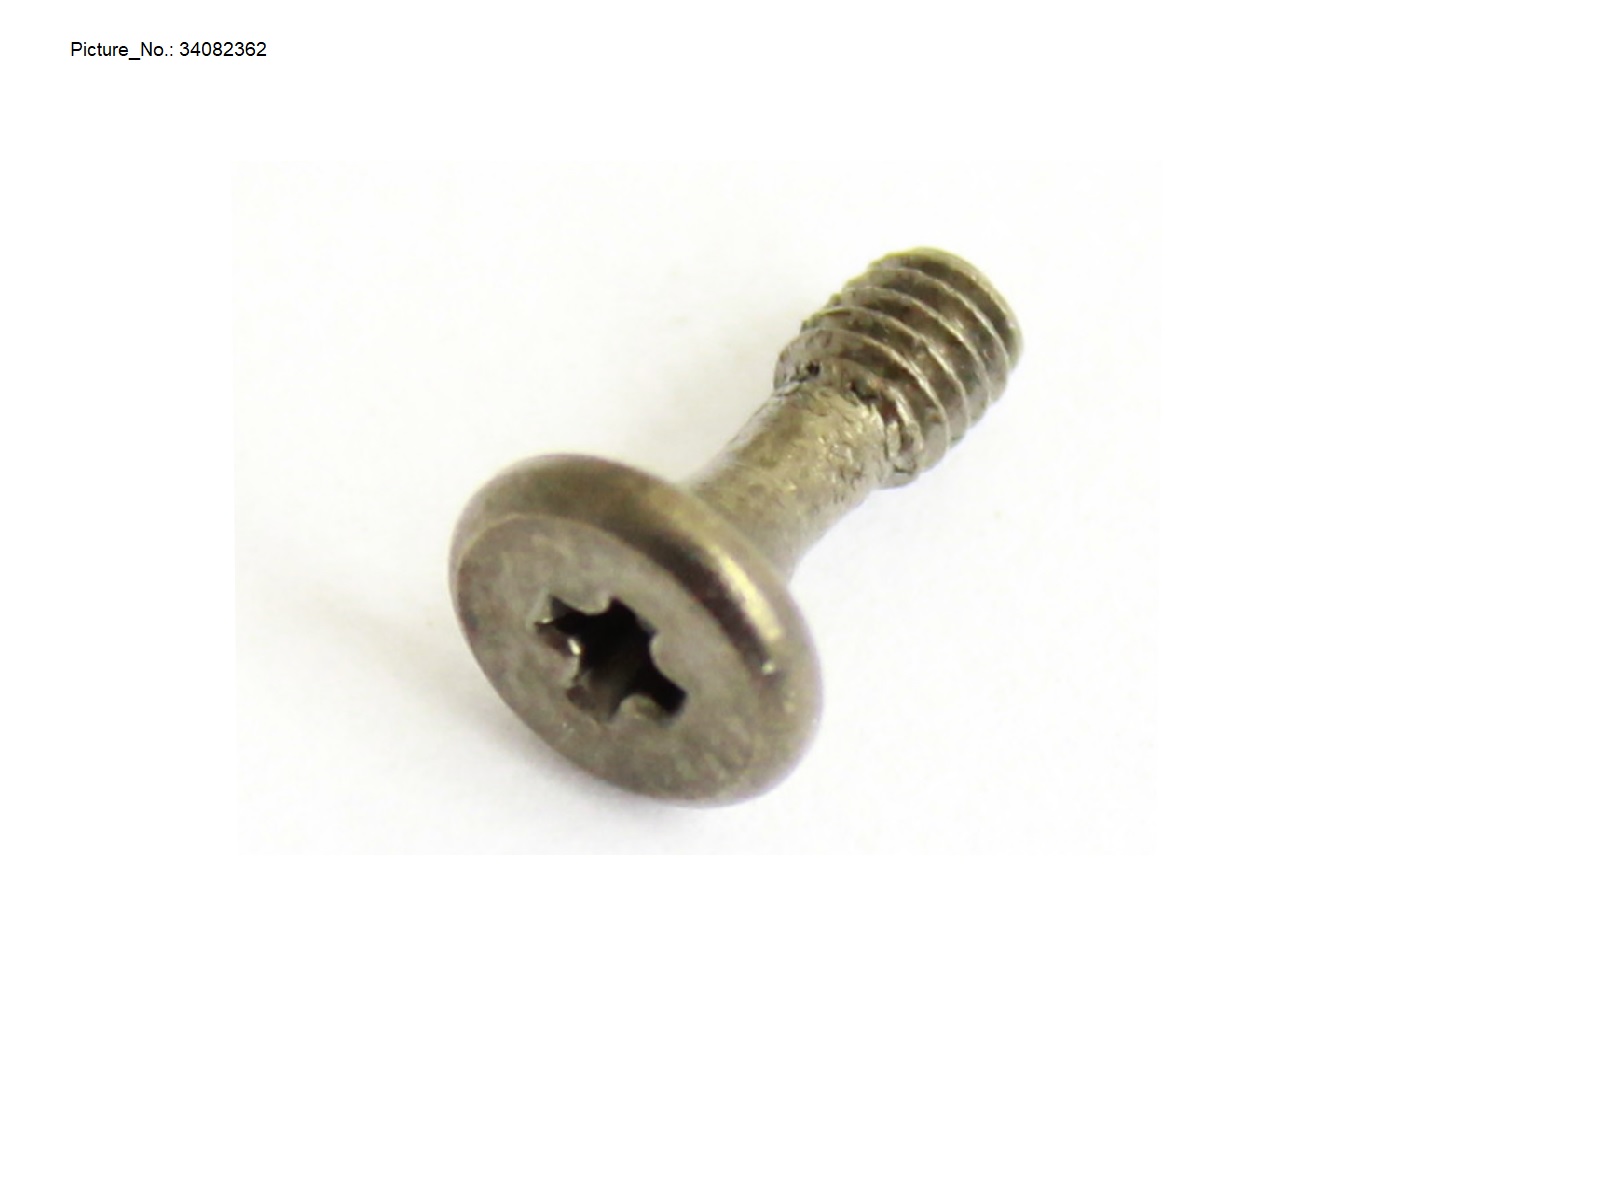 SCREW, M2.5XL6.5 (FOR LOWER ASSY)